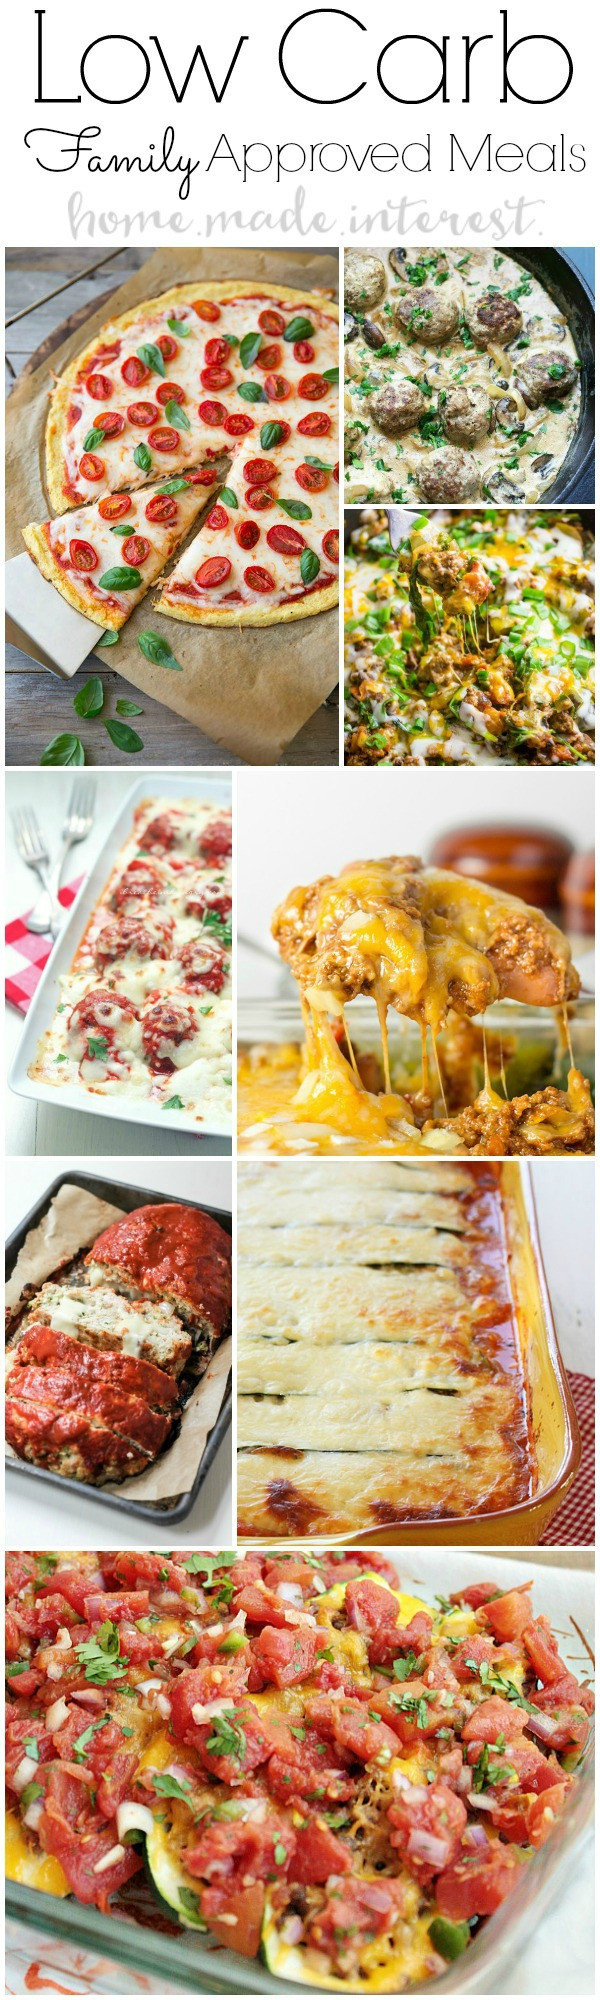 Low Carb Dinners For Family
 Low Carb Dinner Recipes for Family Home Made Interest